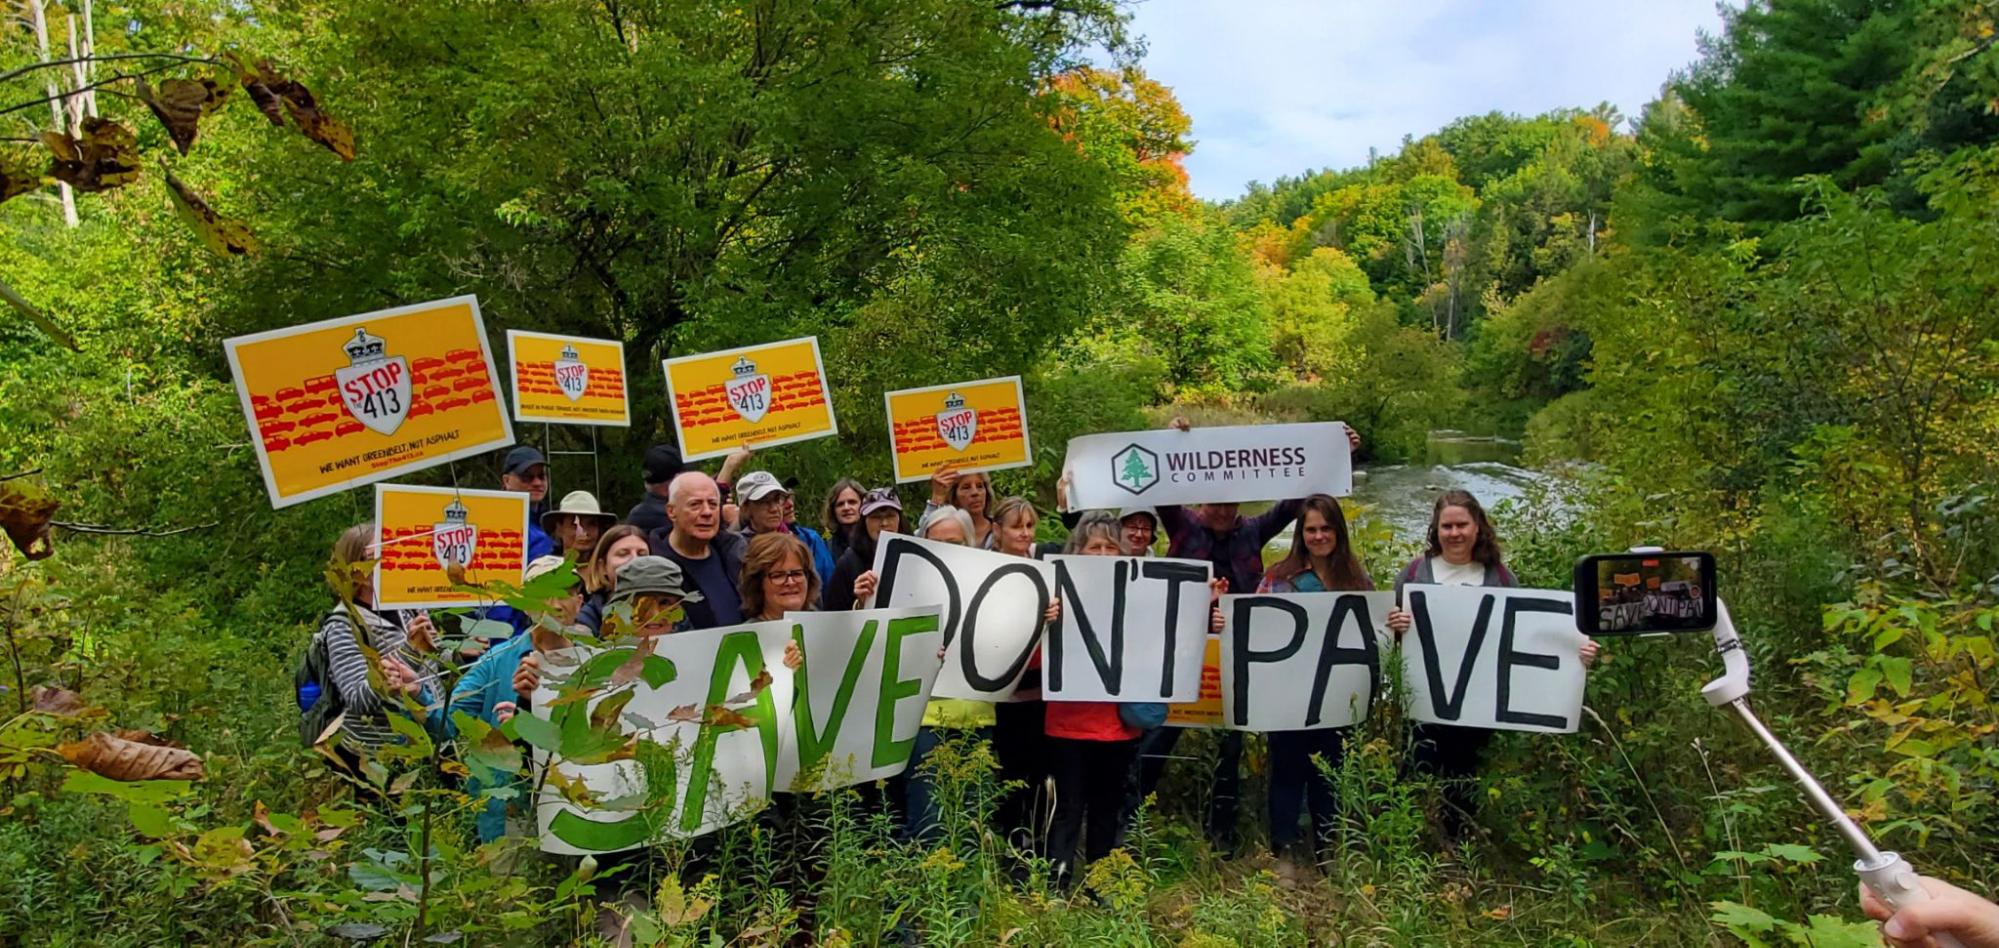 A group of people in the Greenbelt with a banner that says "Save don't pave". End of image description. 